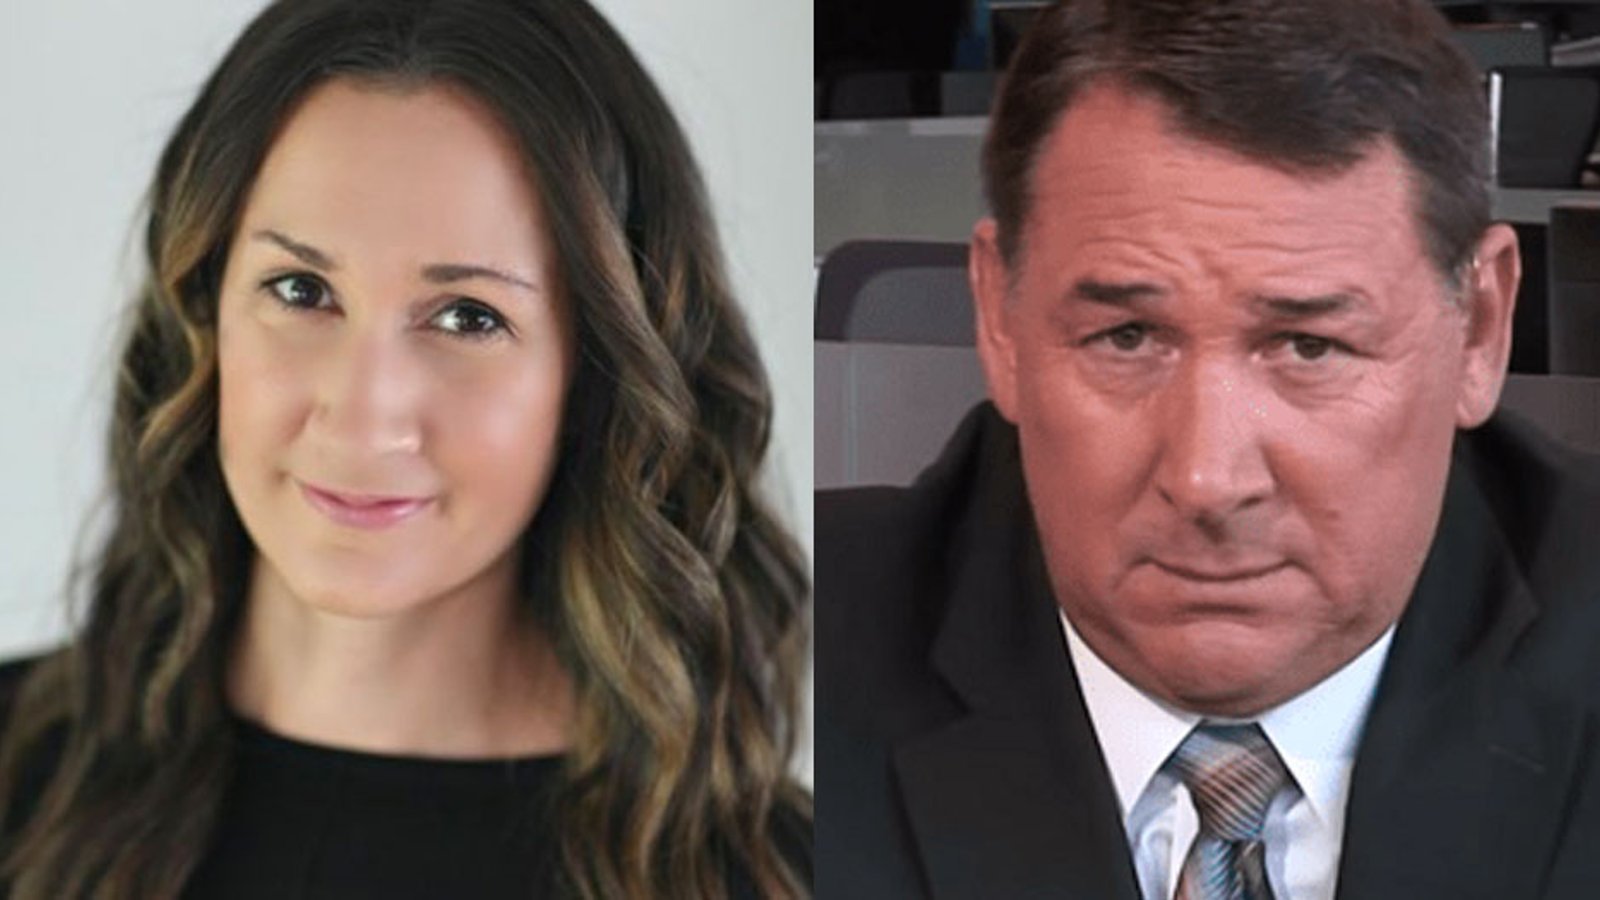 Katie Strang knock outs Mike Milbury in best way possible! 